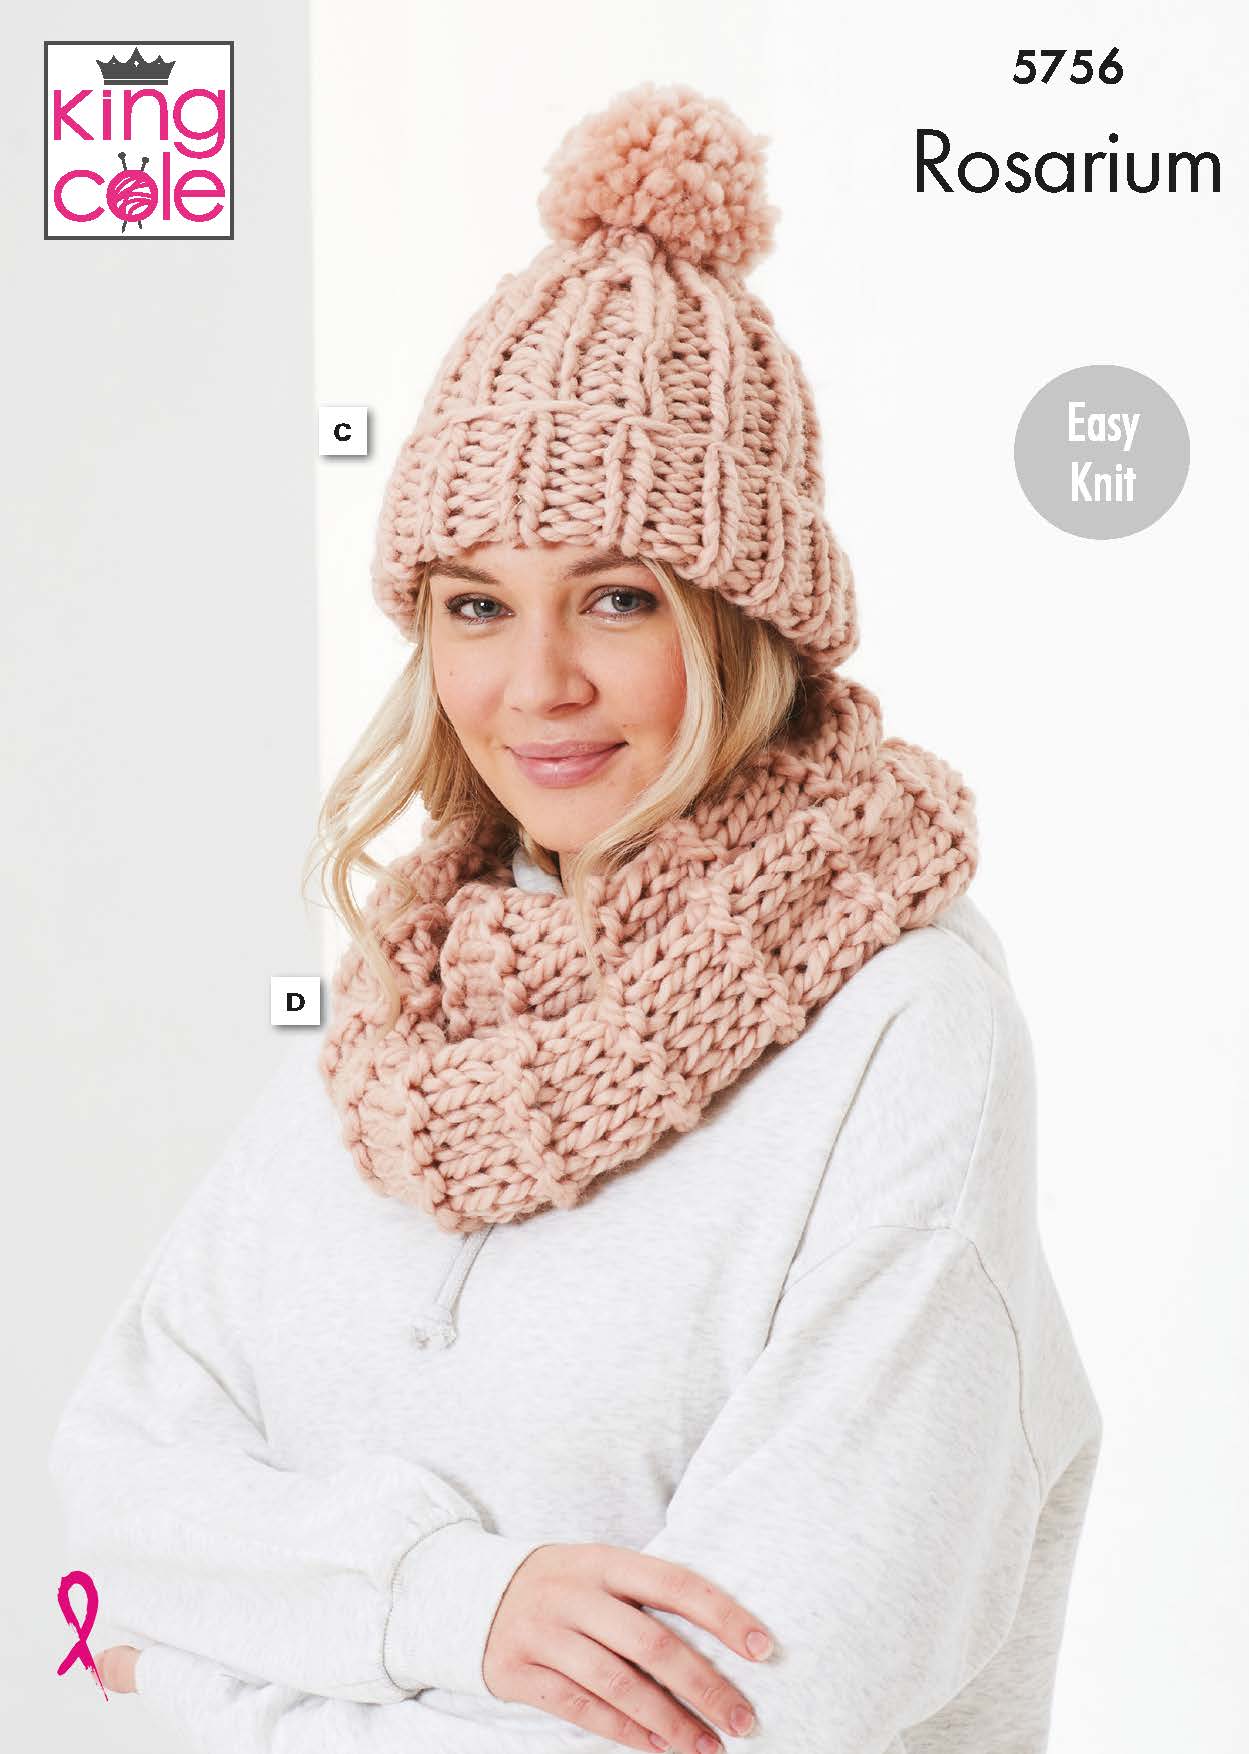 Easy to Follow Hats, Headband, Snoods, & Polo Neck Knitted in Rosarium ...